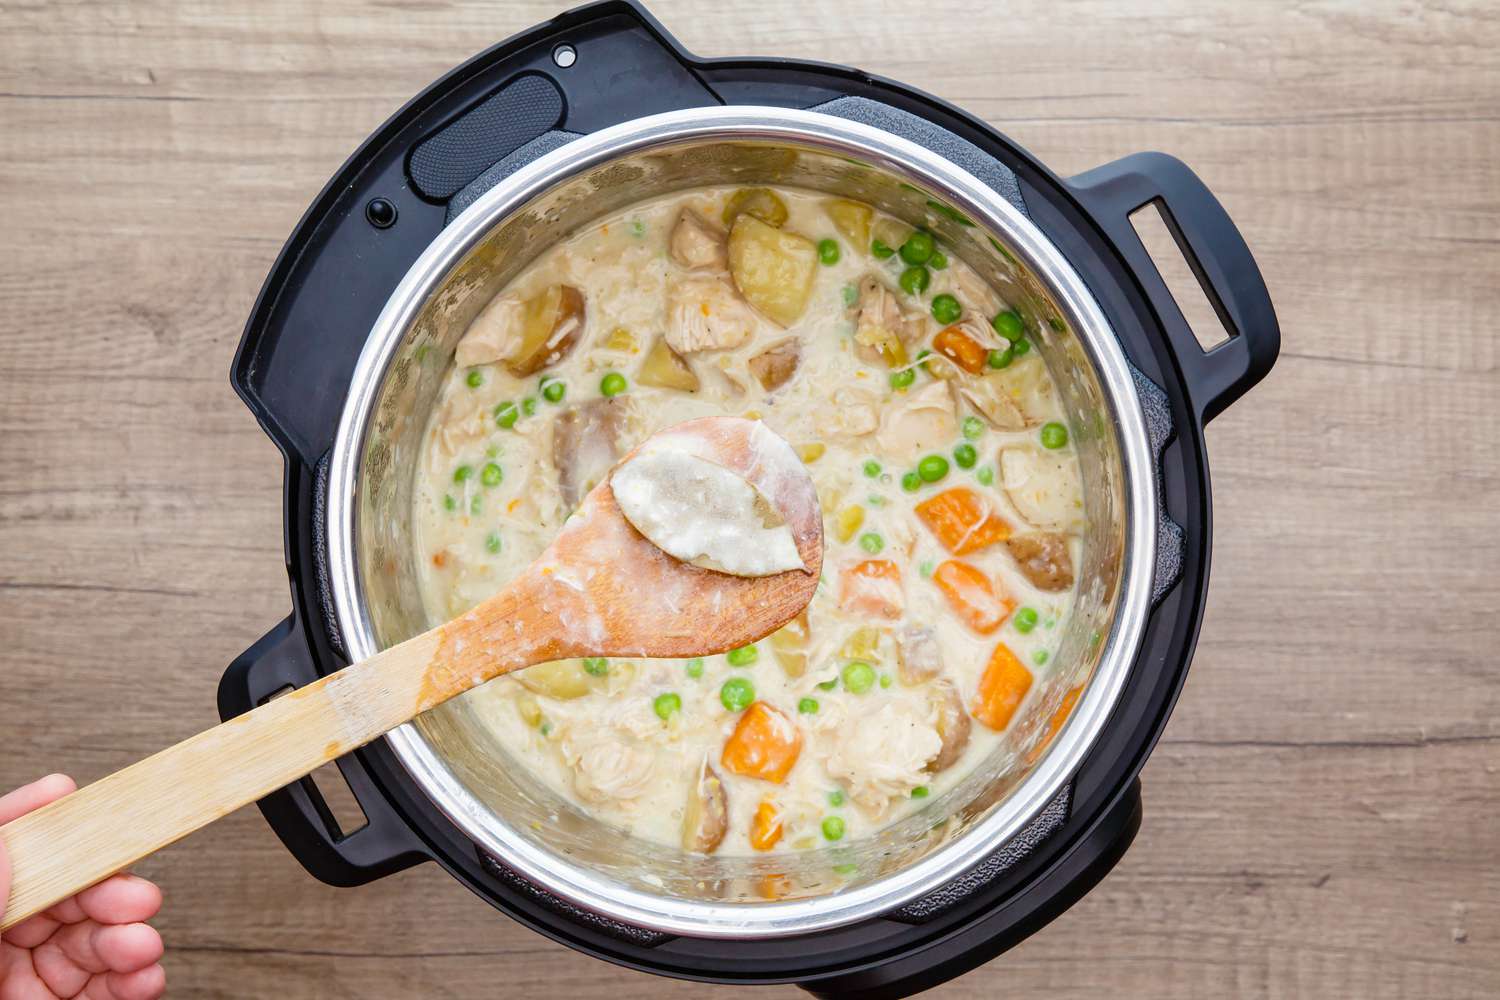 How To Make Chicken Potpie With An Electric Pressure Cooker